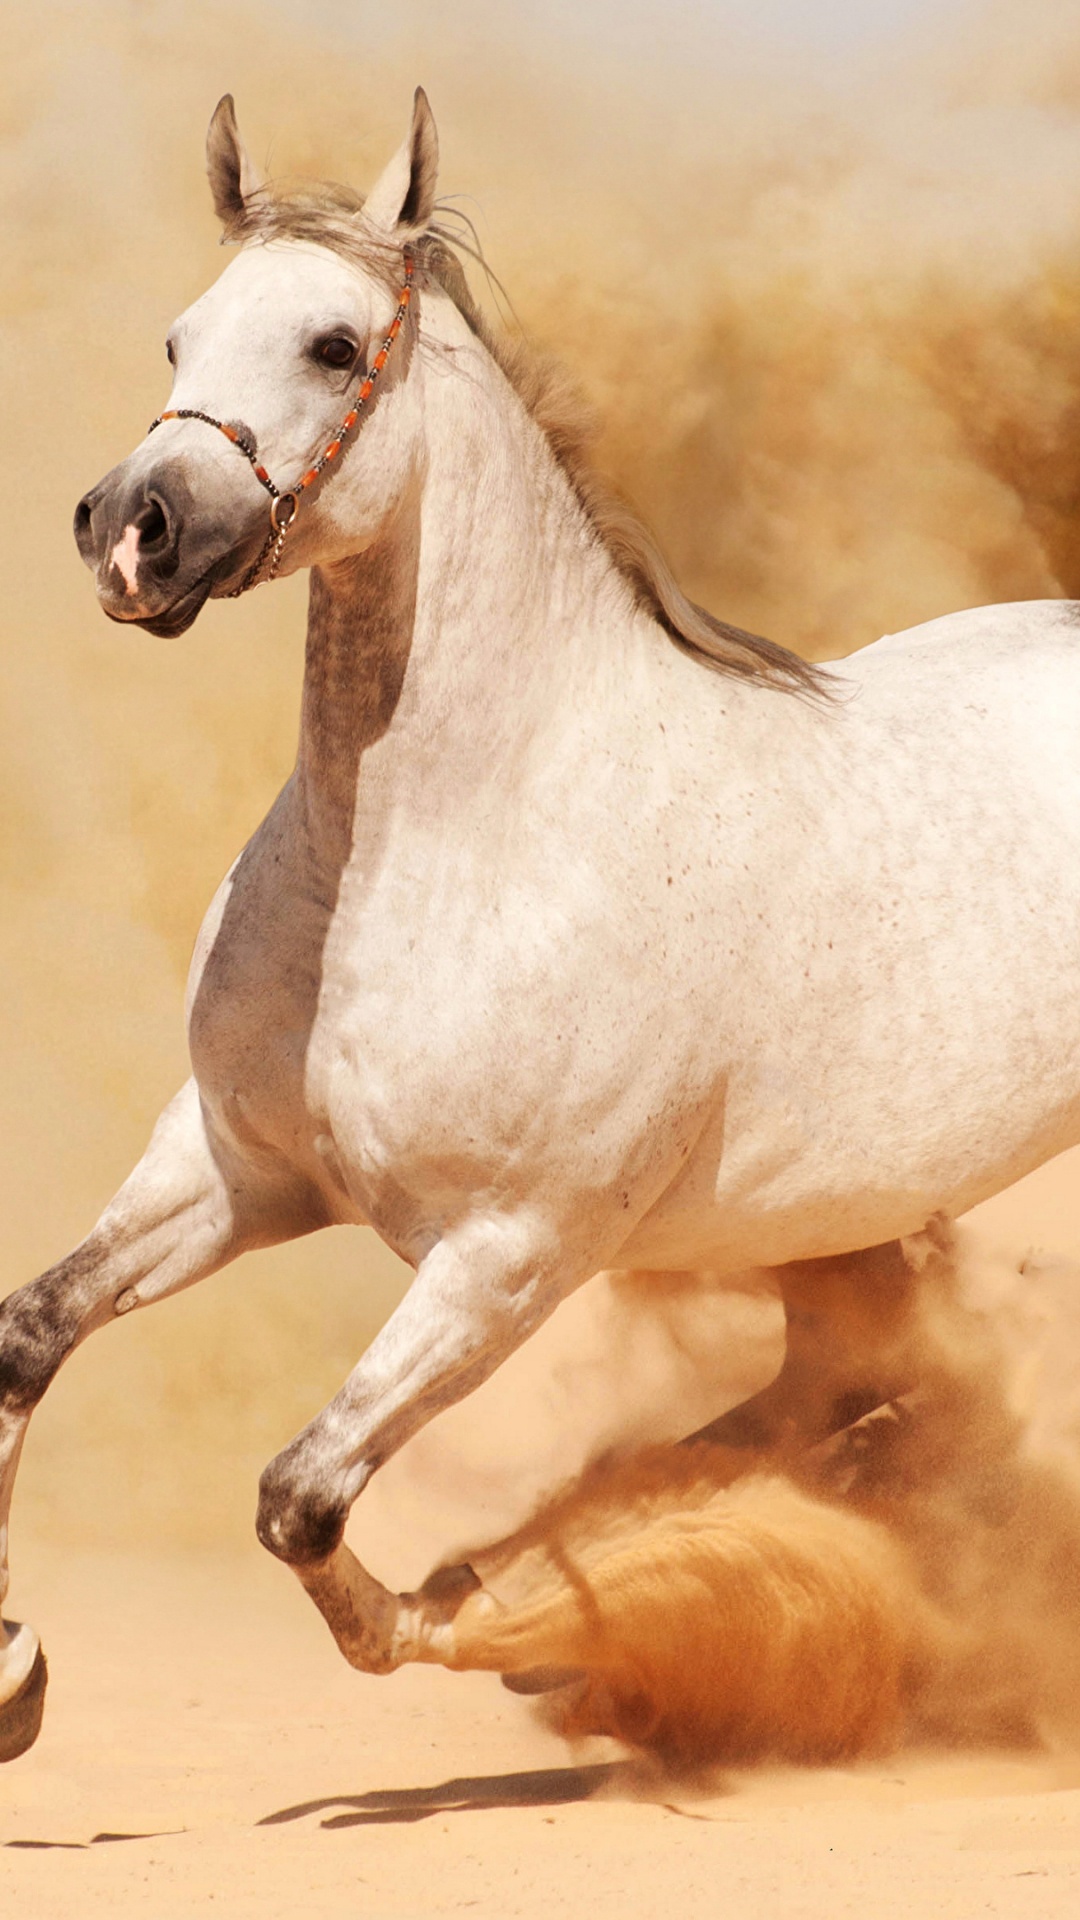 White Horse Running on Brown Sand During Daytime. Wallpaper in 1080x1920 Resolution